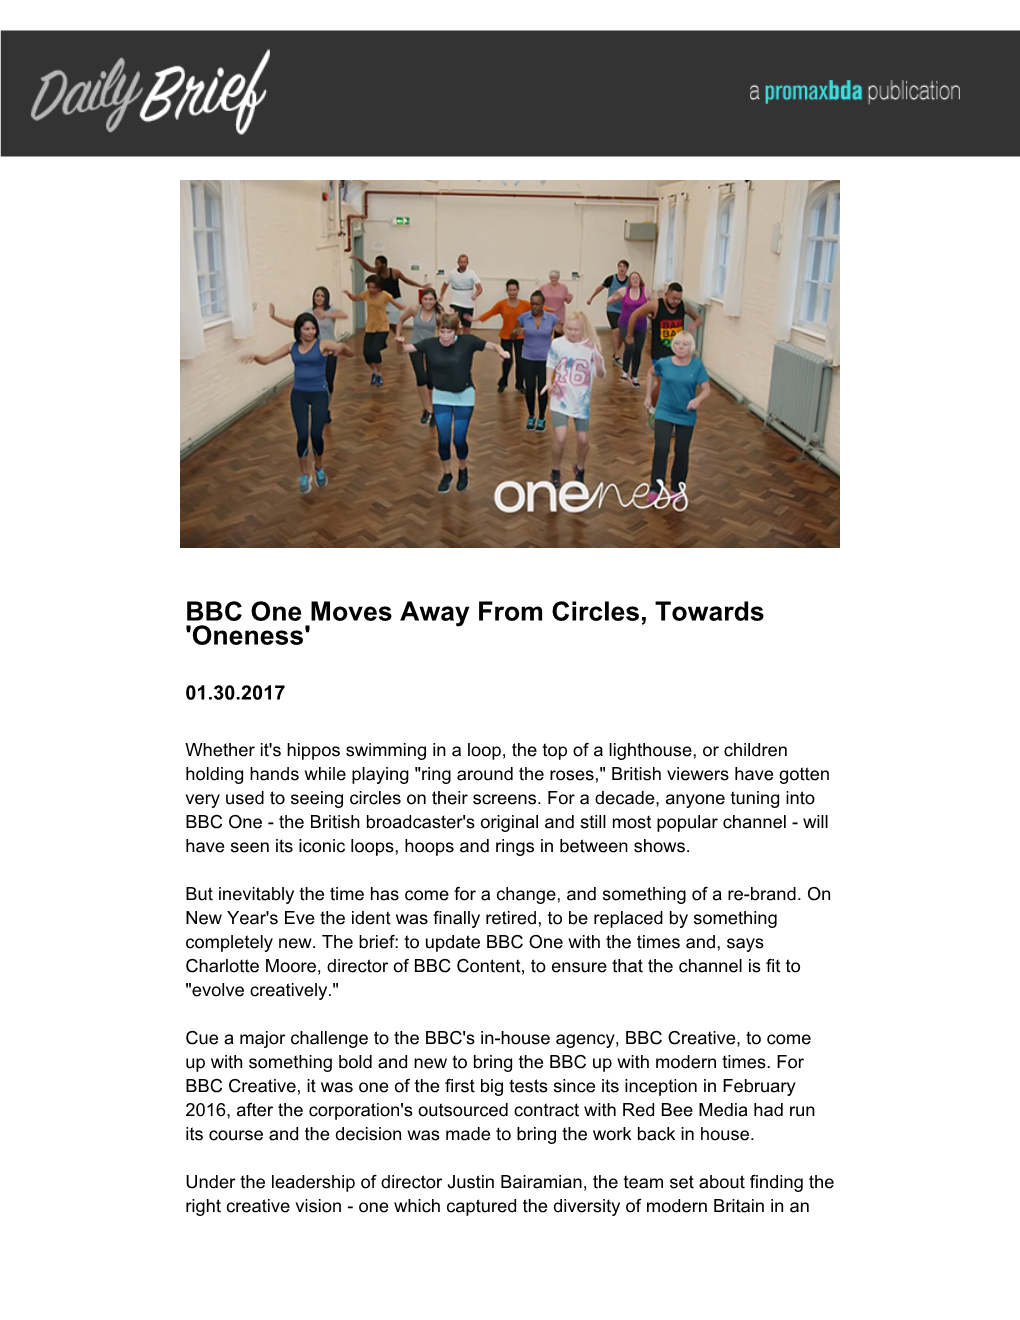 BBC One Moves Away from Circles, Towards 'Oneness'